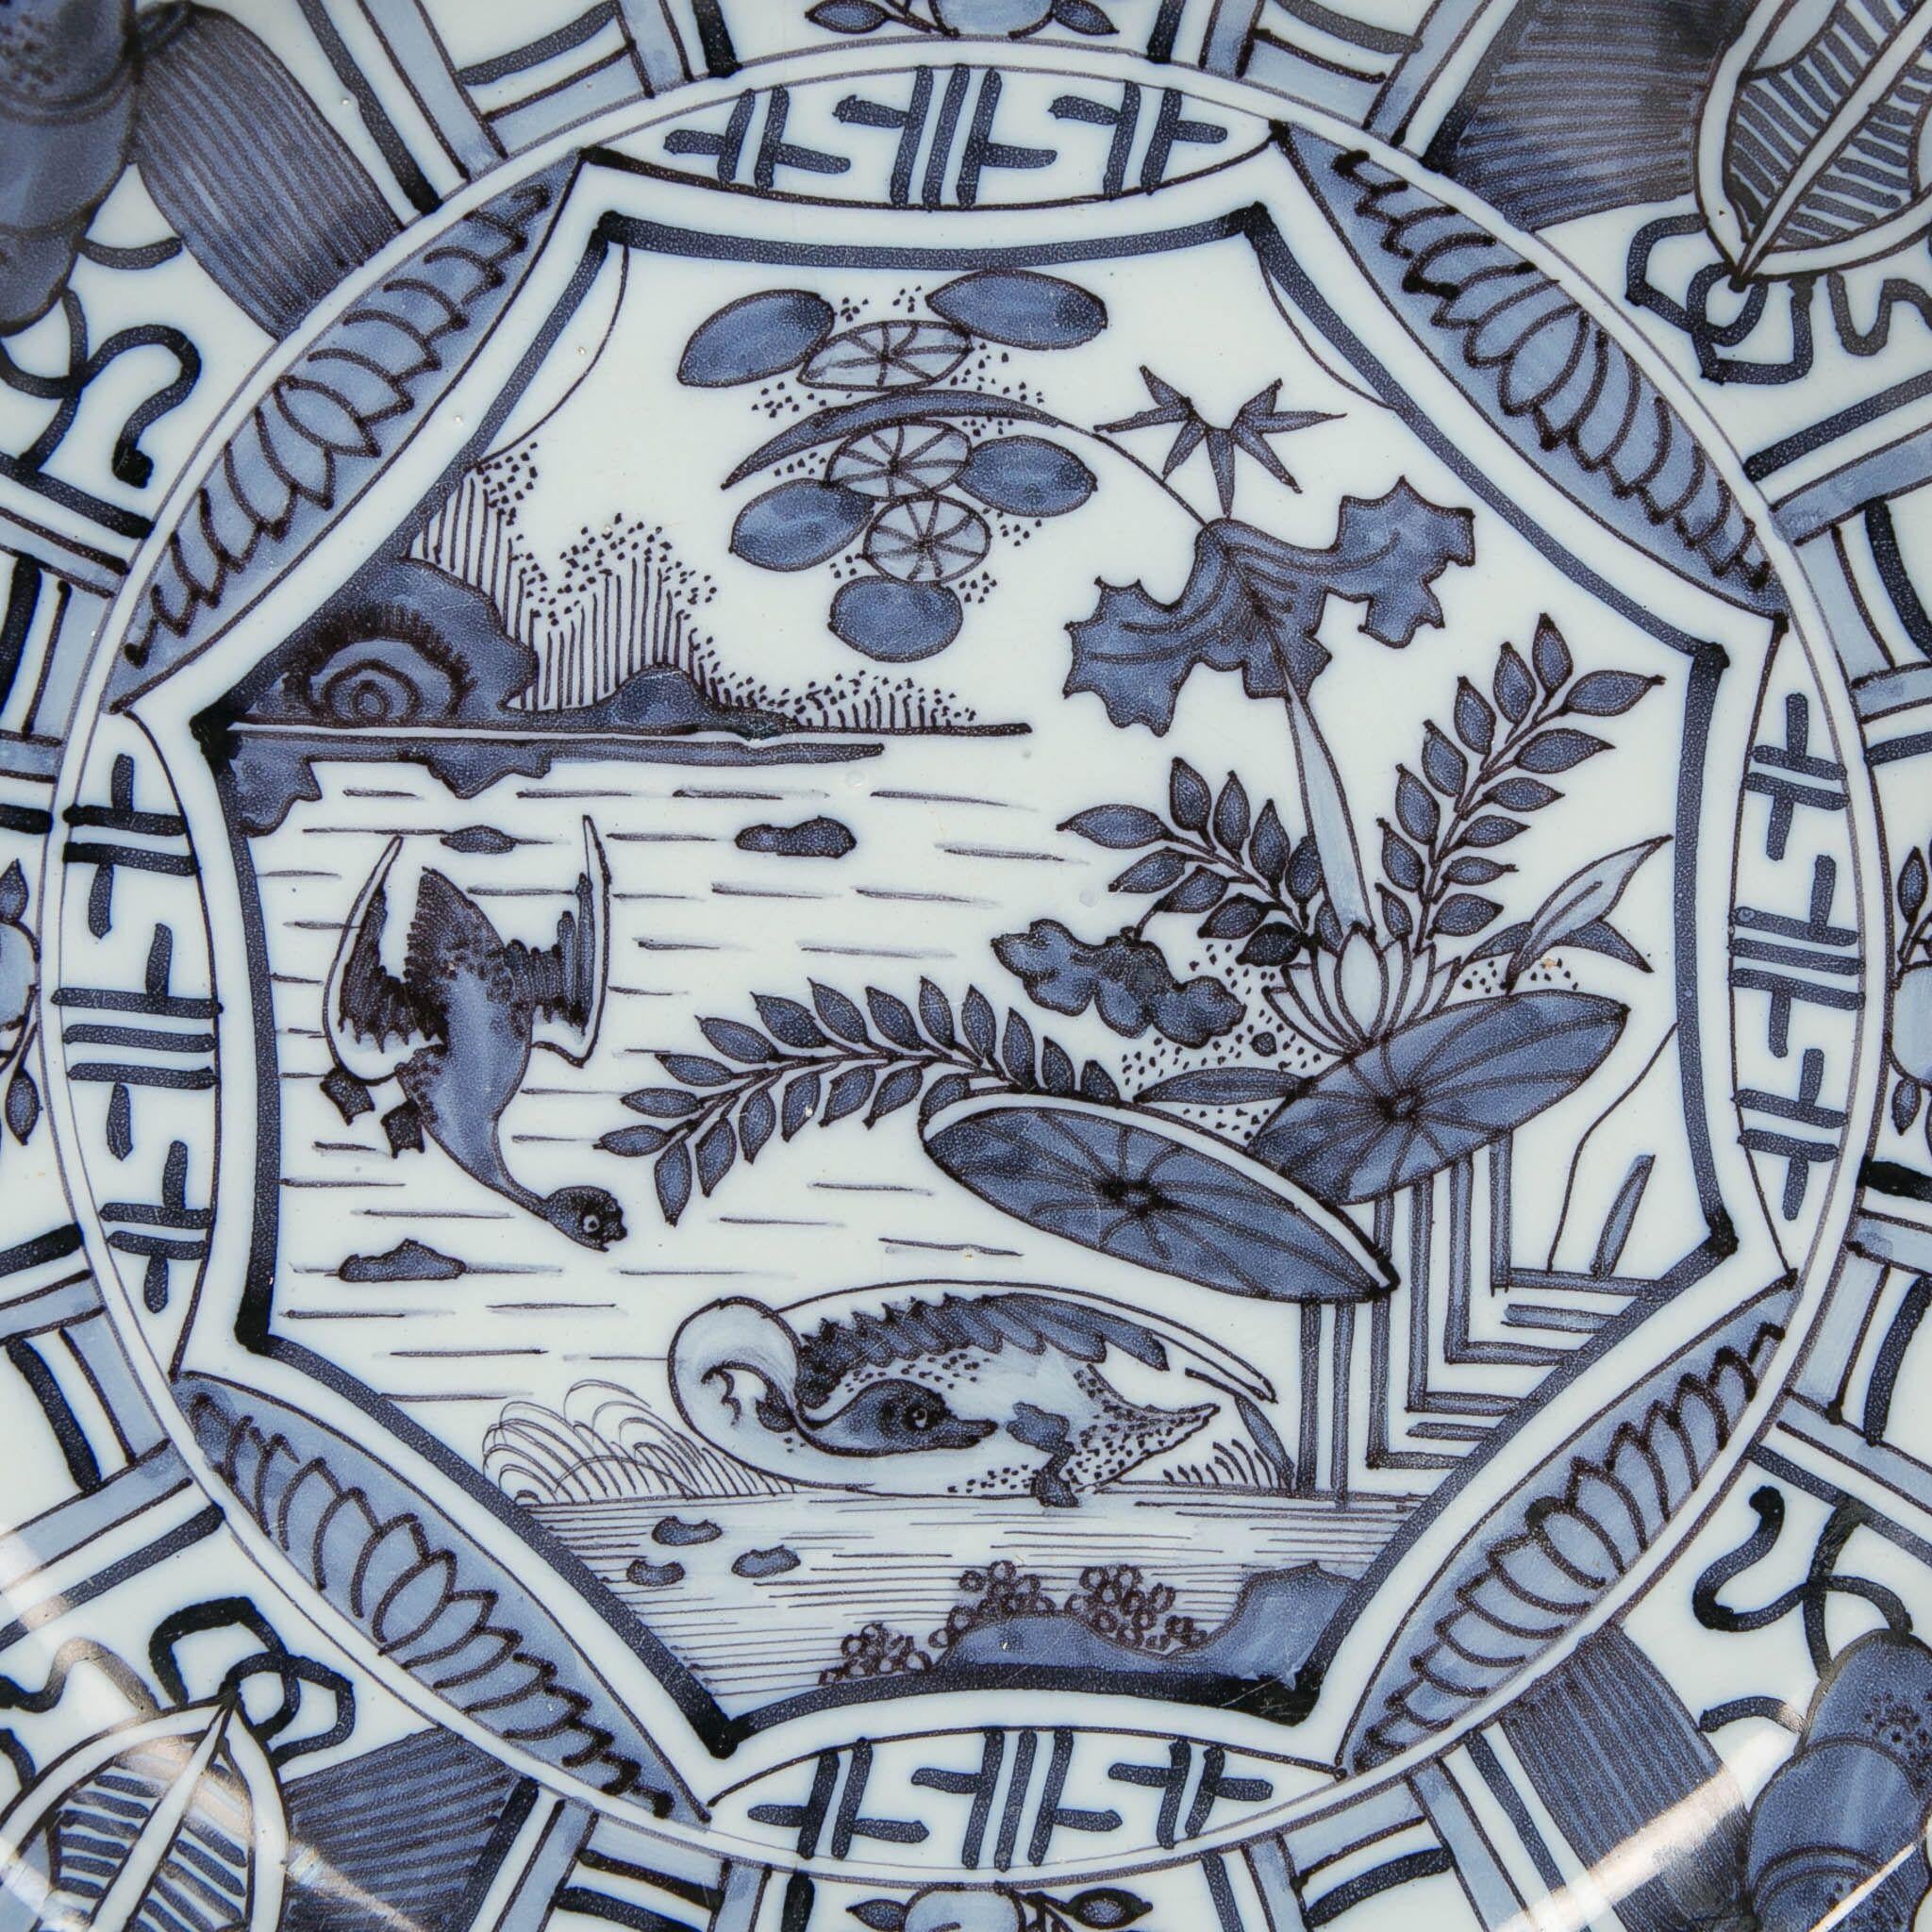 We are proud to offer this beautiful Dutch delft blue and white charger made in the late 17th century, circa 1680-1690. The decoration is a finely painted replica of Chinese Kraak porcelains made in the second half of the 1600s. As imports from